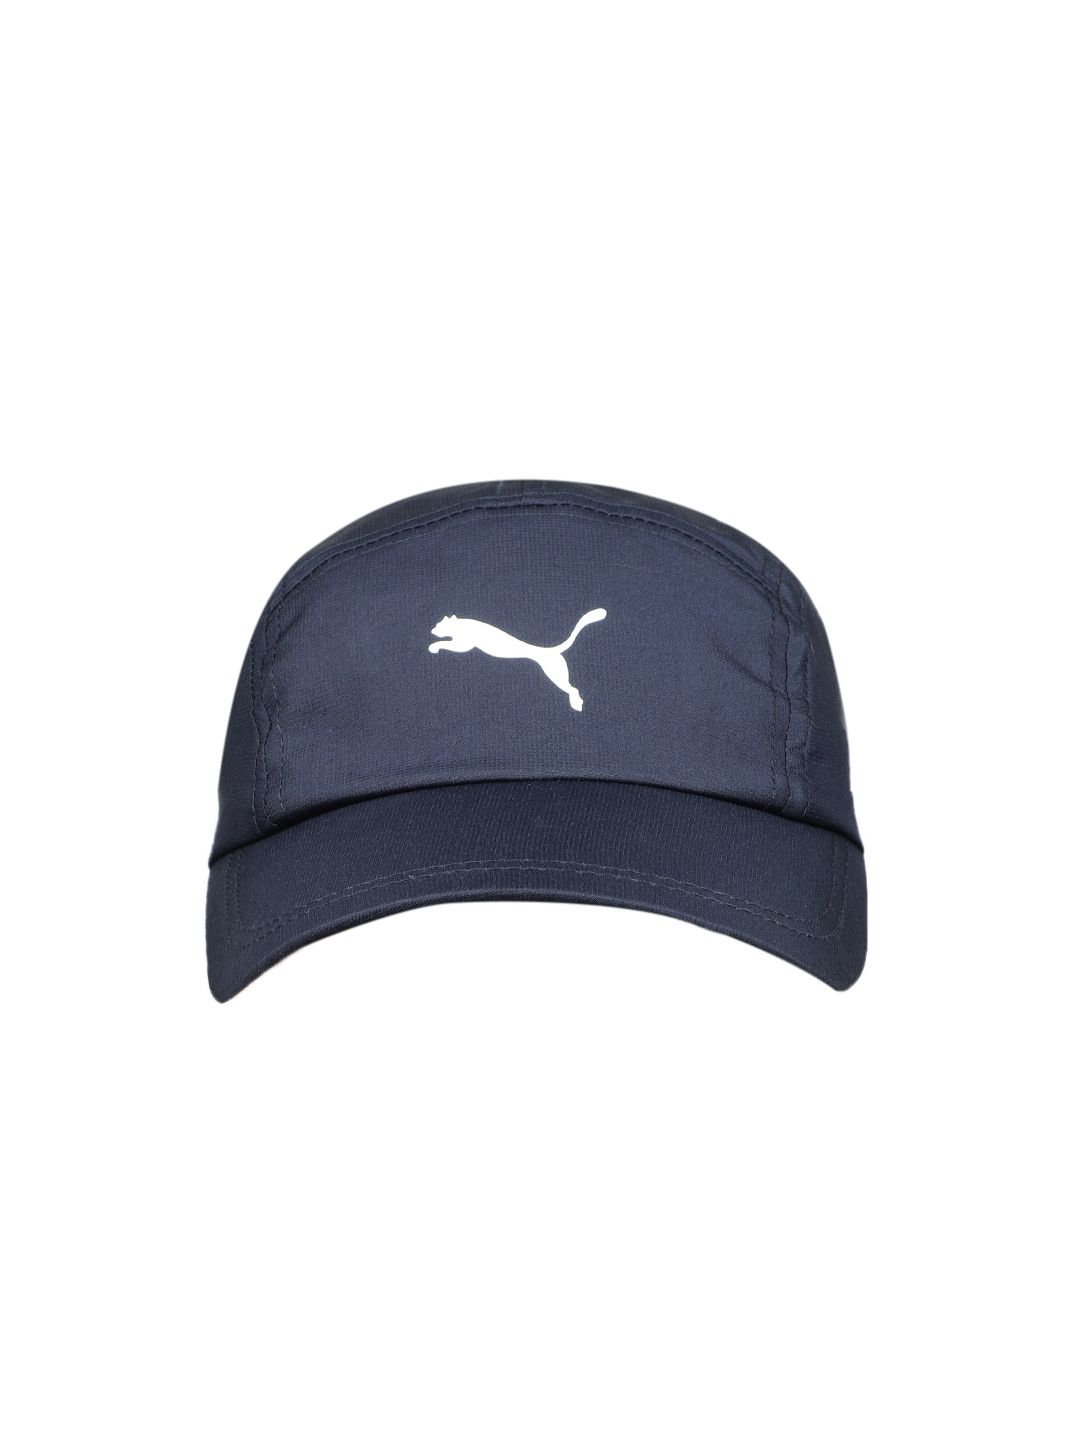 Puma Unisex Navy Blue Solid Polyester Baseball Cap Price in India